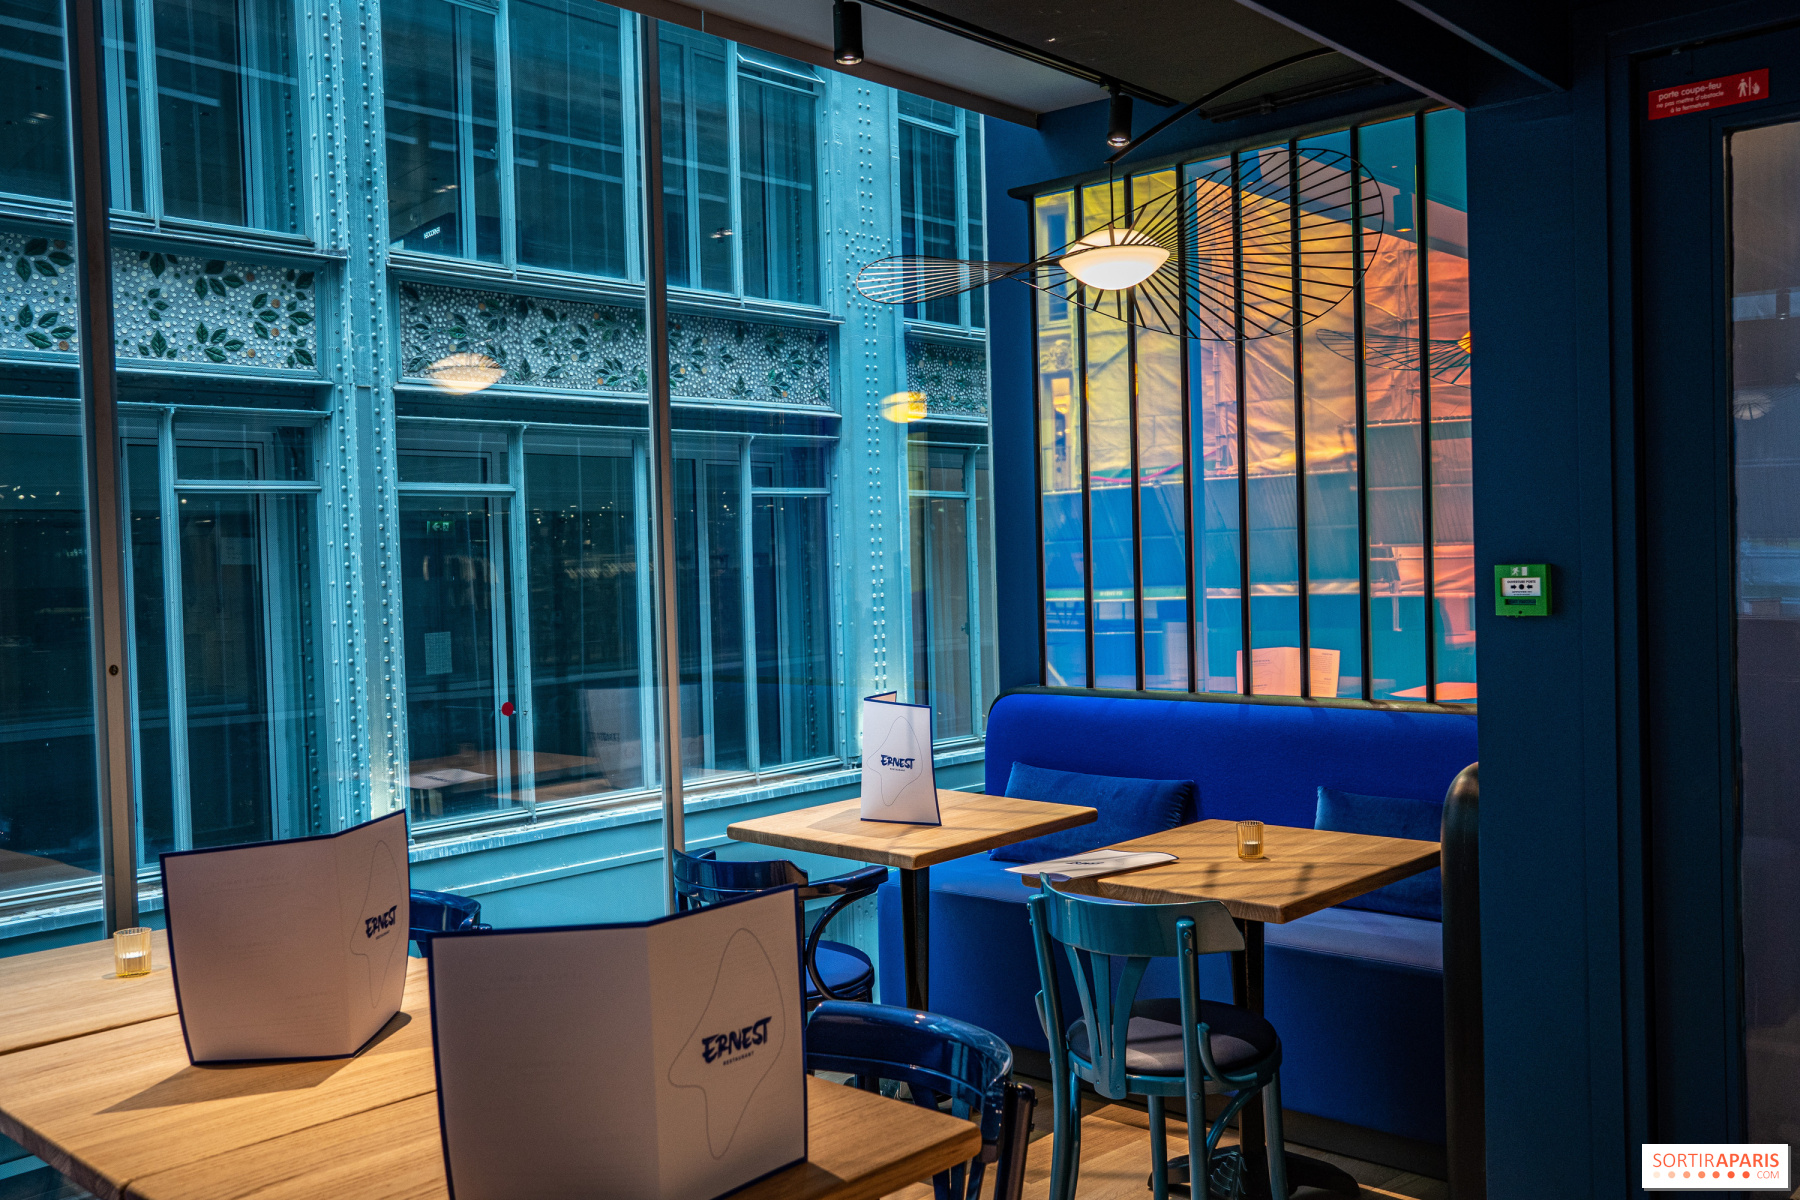 La Samaritaine opens, discover all its features 